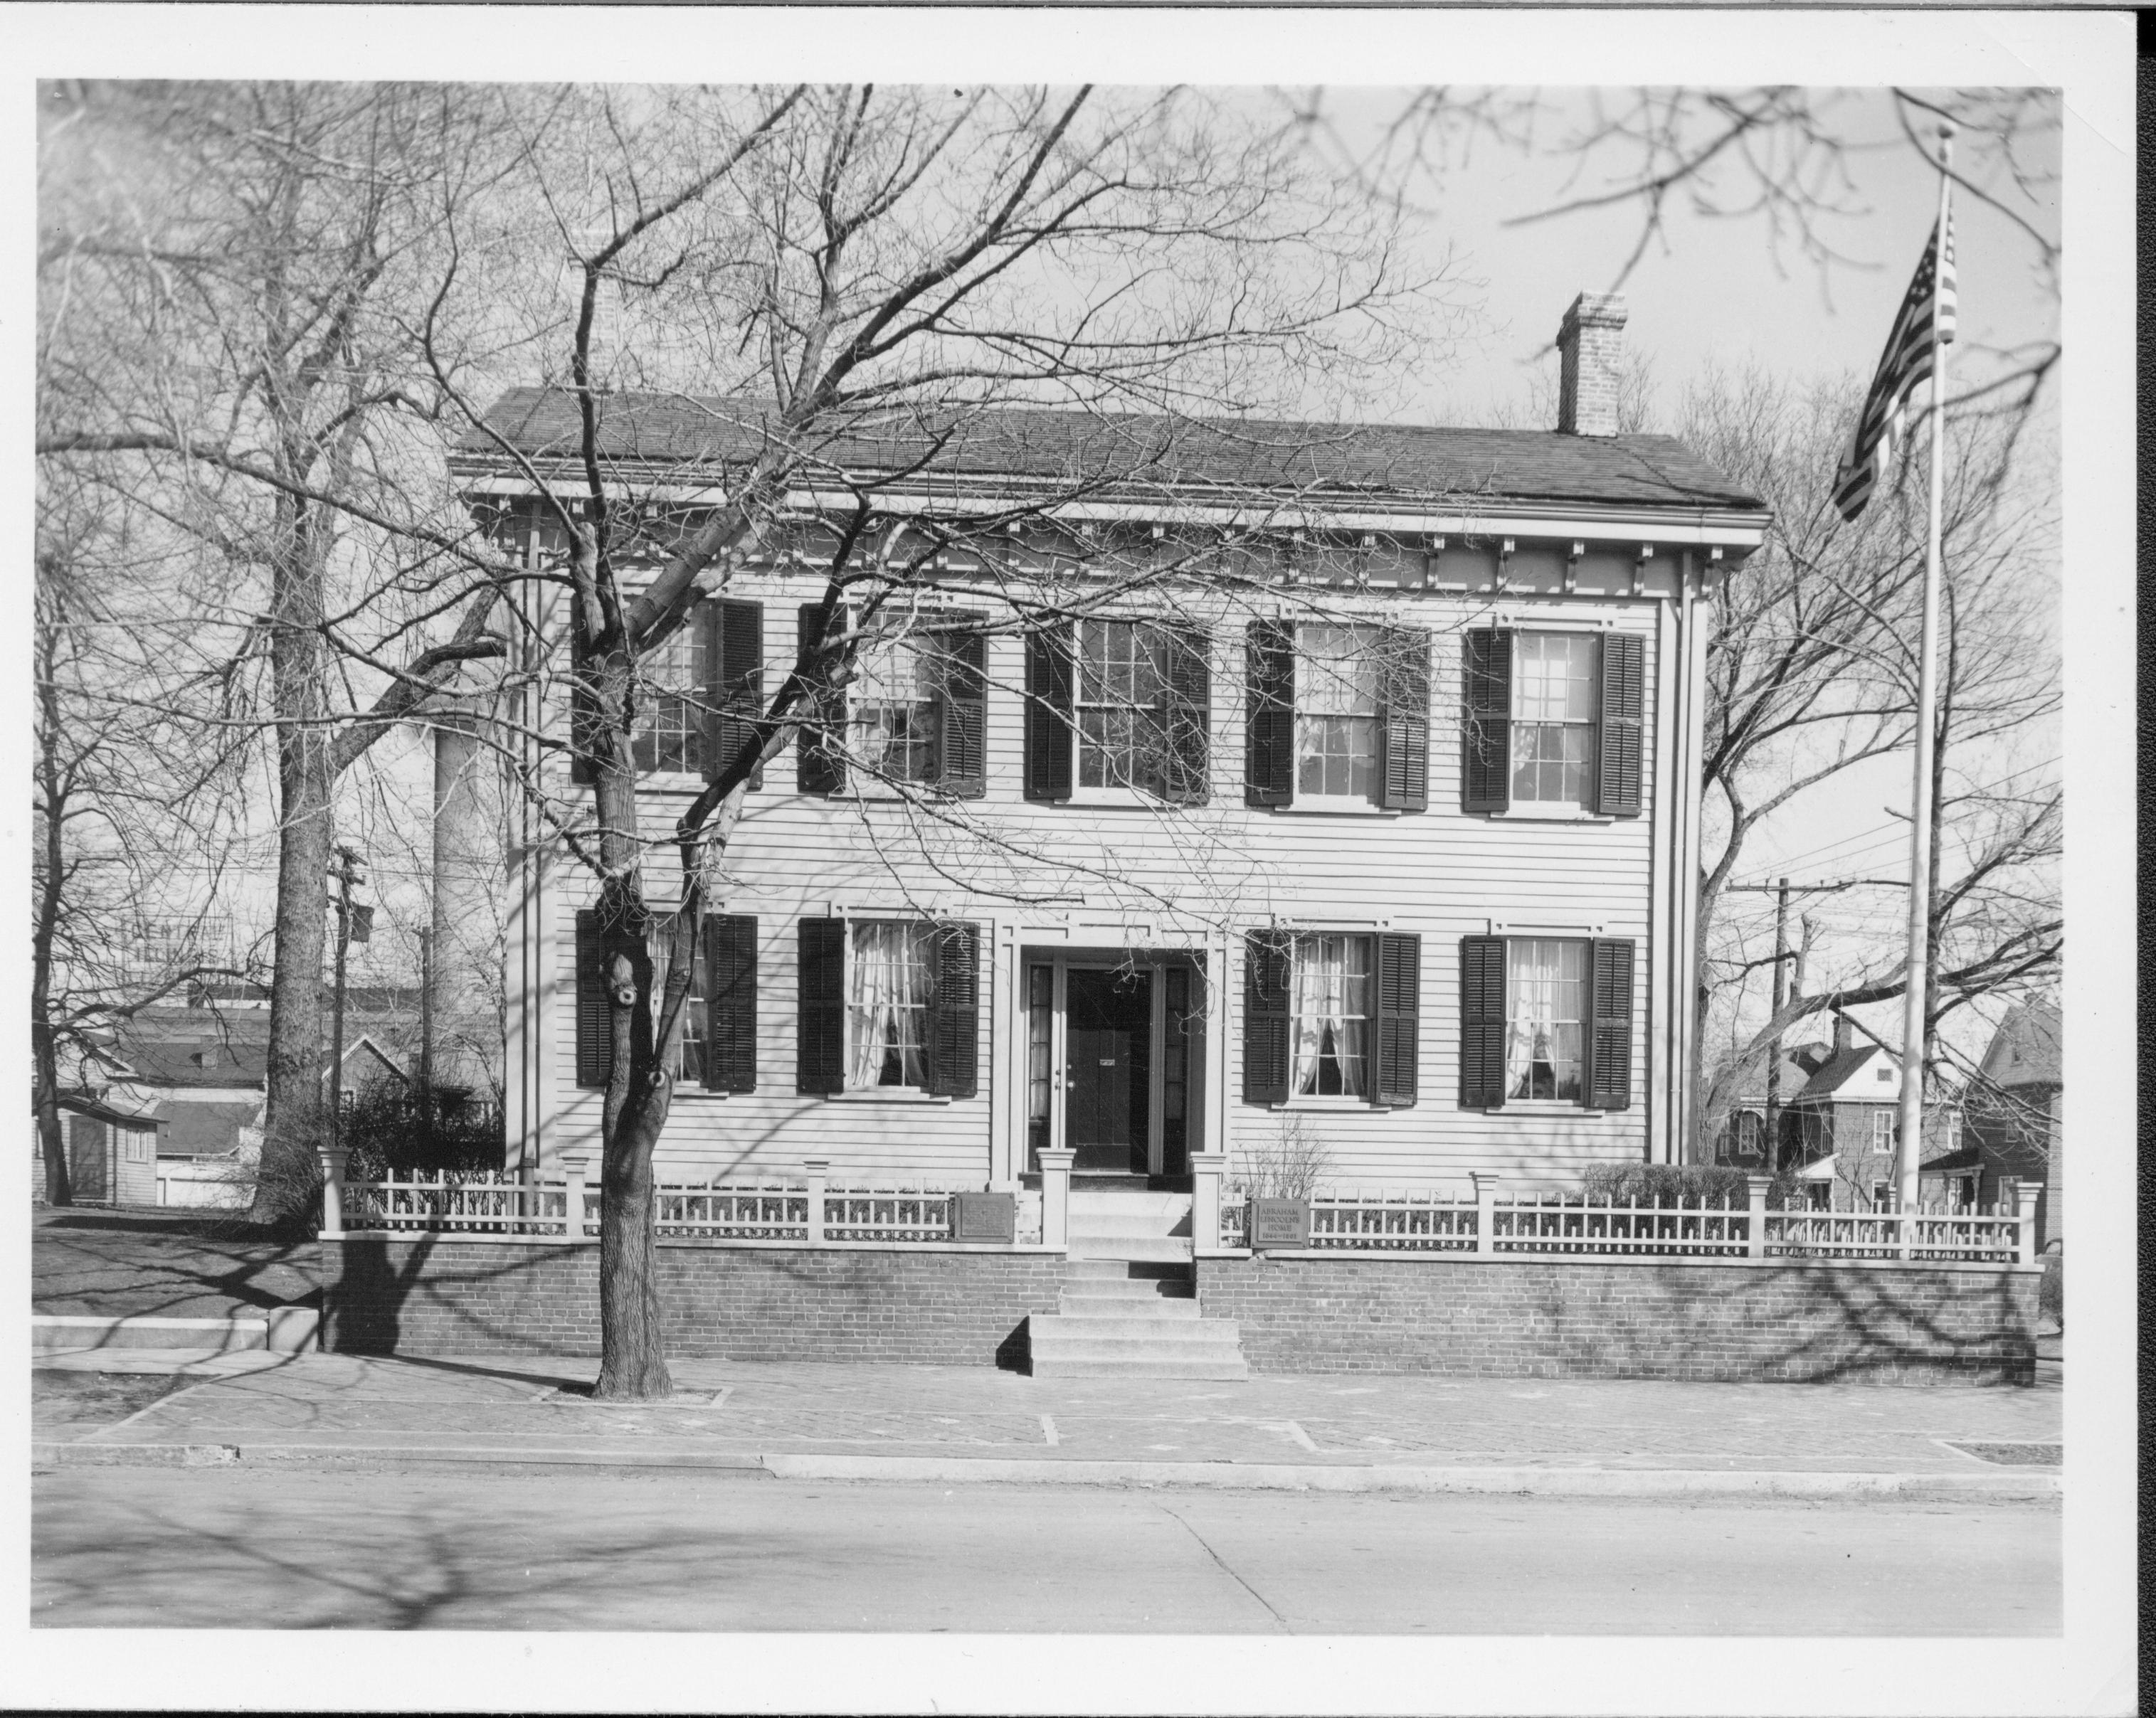 Lincoln Home west (front) elevation, flagpole in corner behind picket fence on right.  Several homes visible behind Lincoln Home on Blocks 10 and 11.  Large tree in brick plaza on left. Looking East from 8th Street Lincoln Home, flagpole, 8th Street, Block 10, Block 11